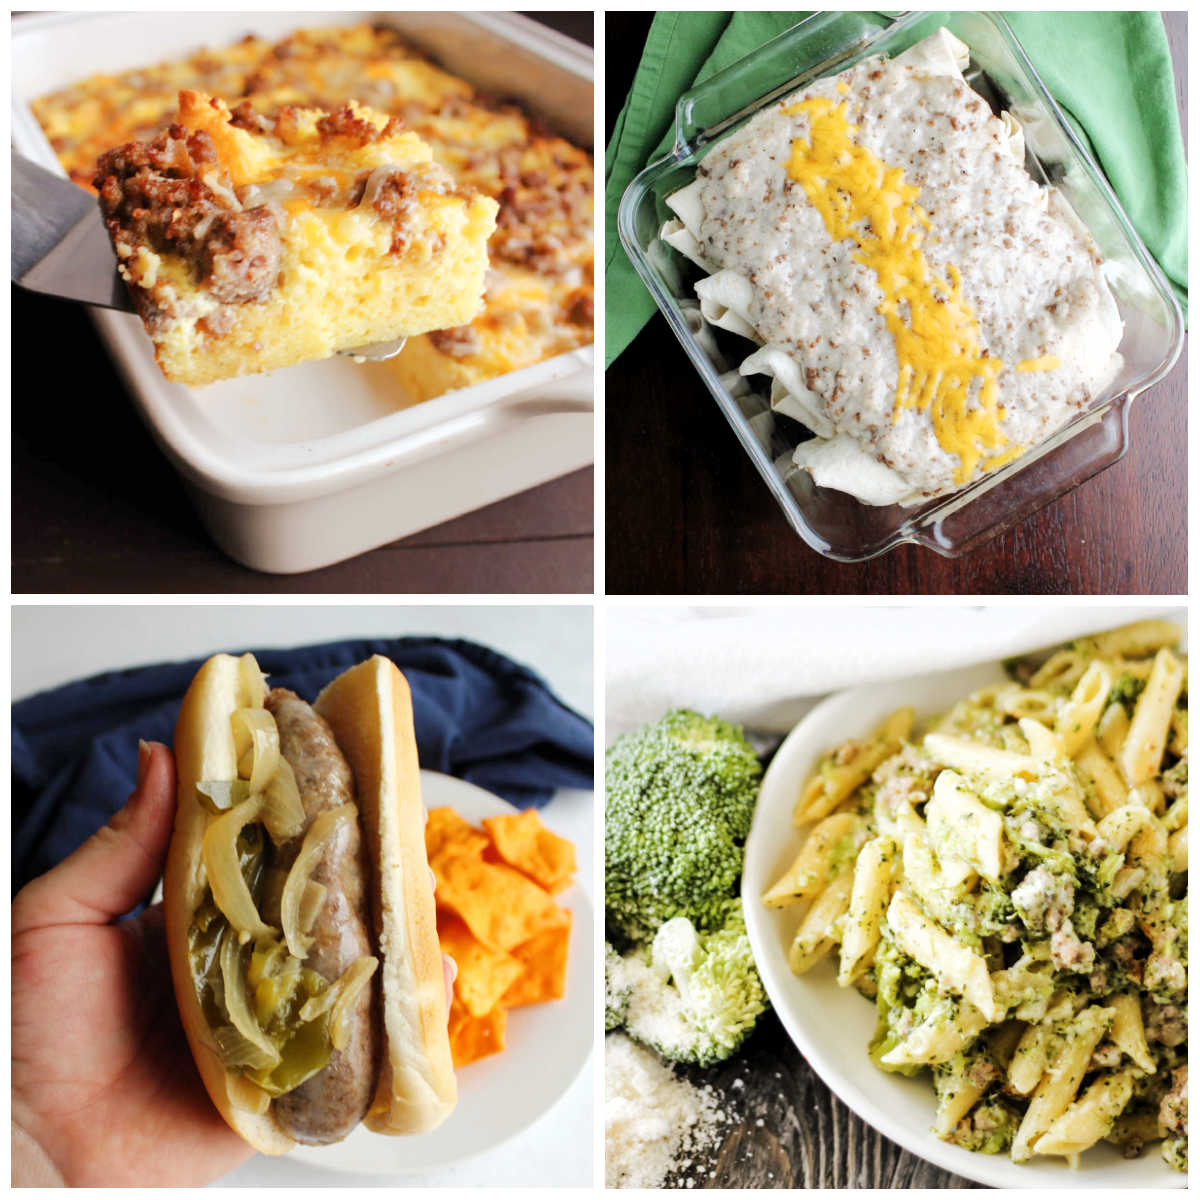 Collage of recipes using sausage including a breakfast casserole, brats with peppers and onions, smothered breakfast burritos and an Italian sausage and pasta meal.